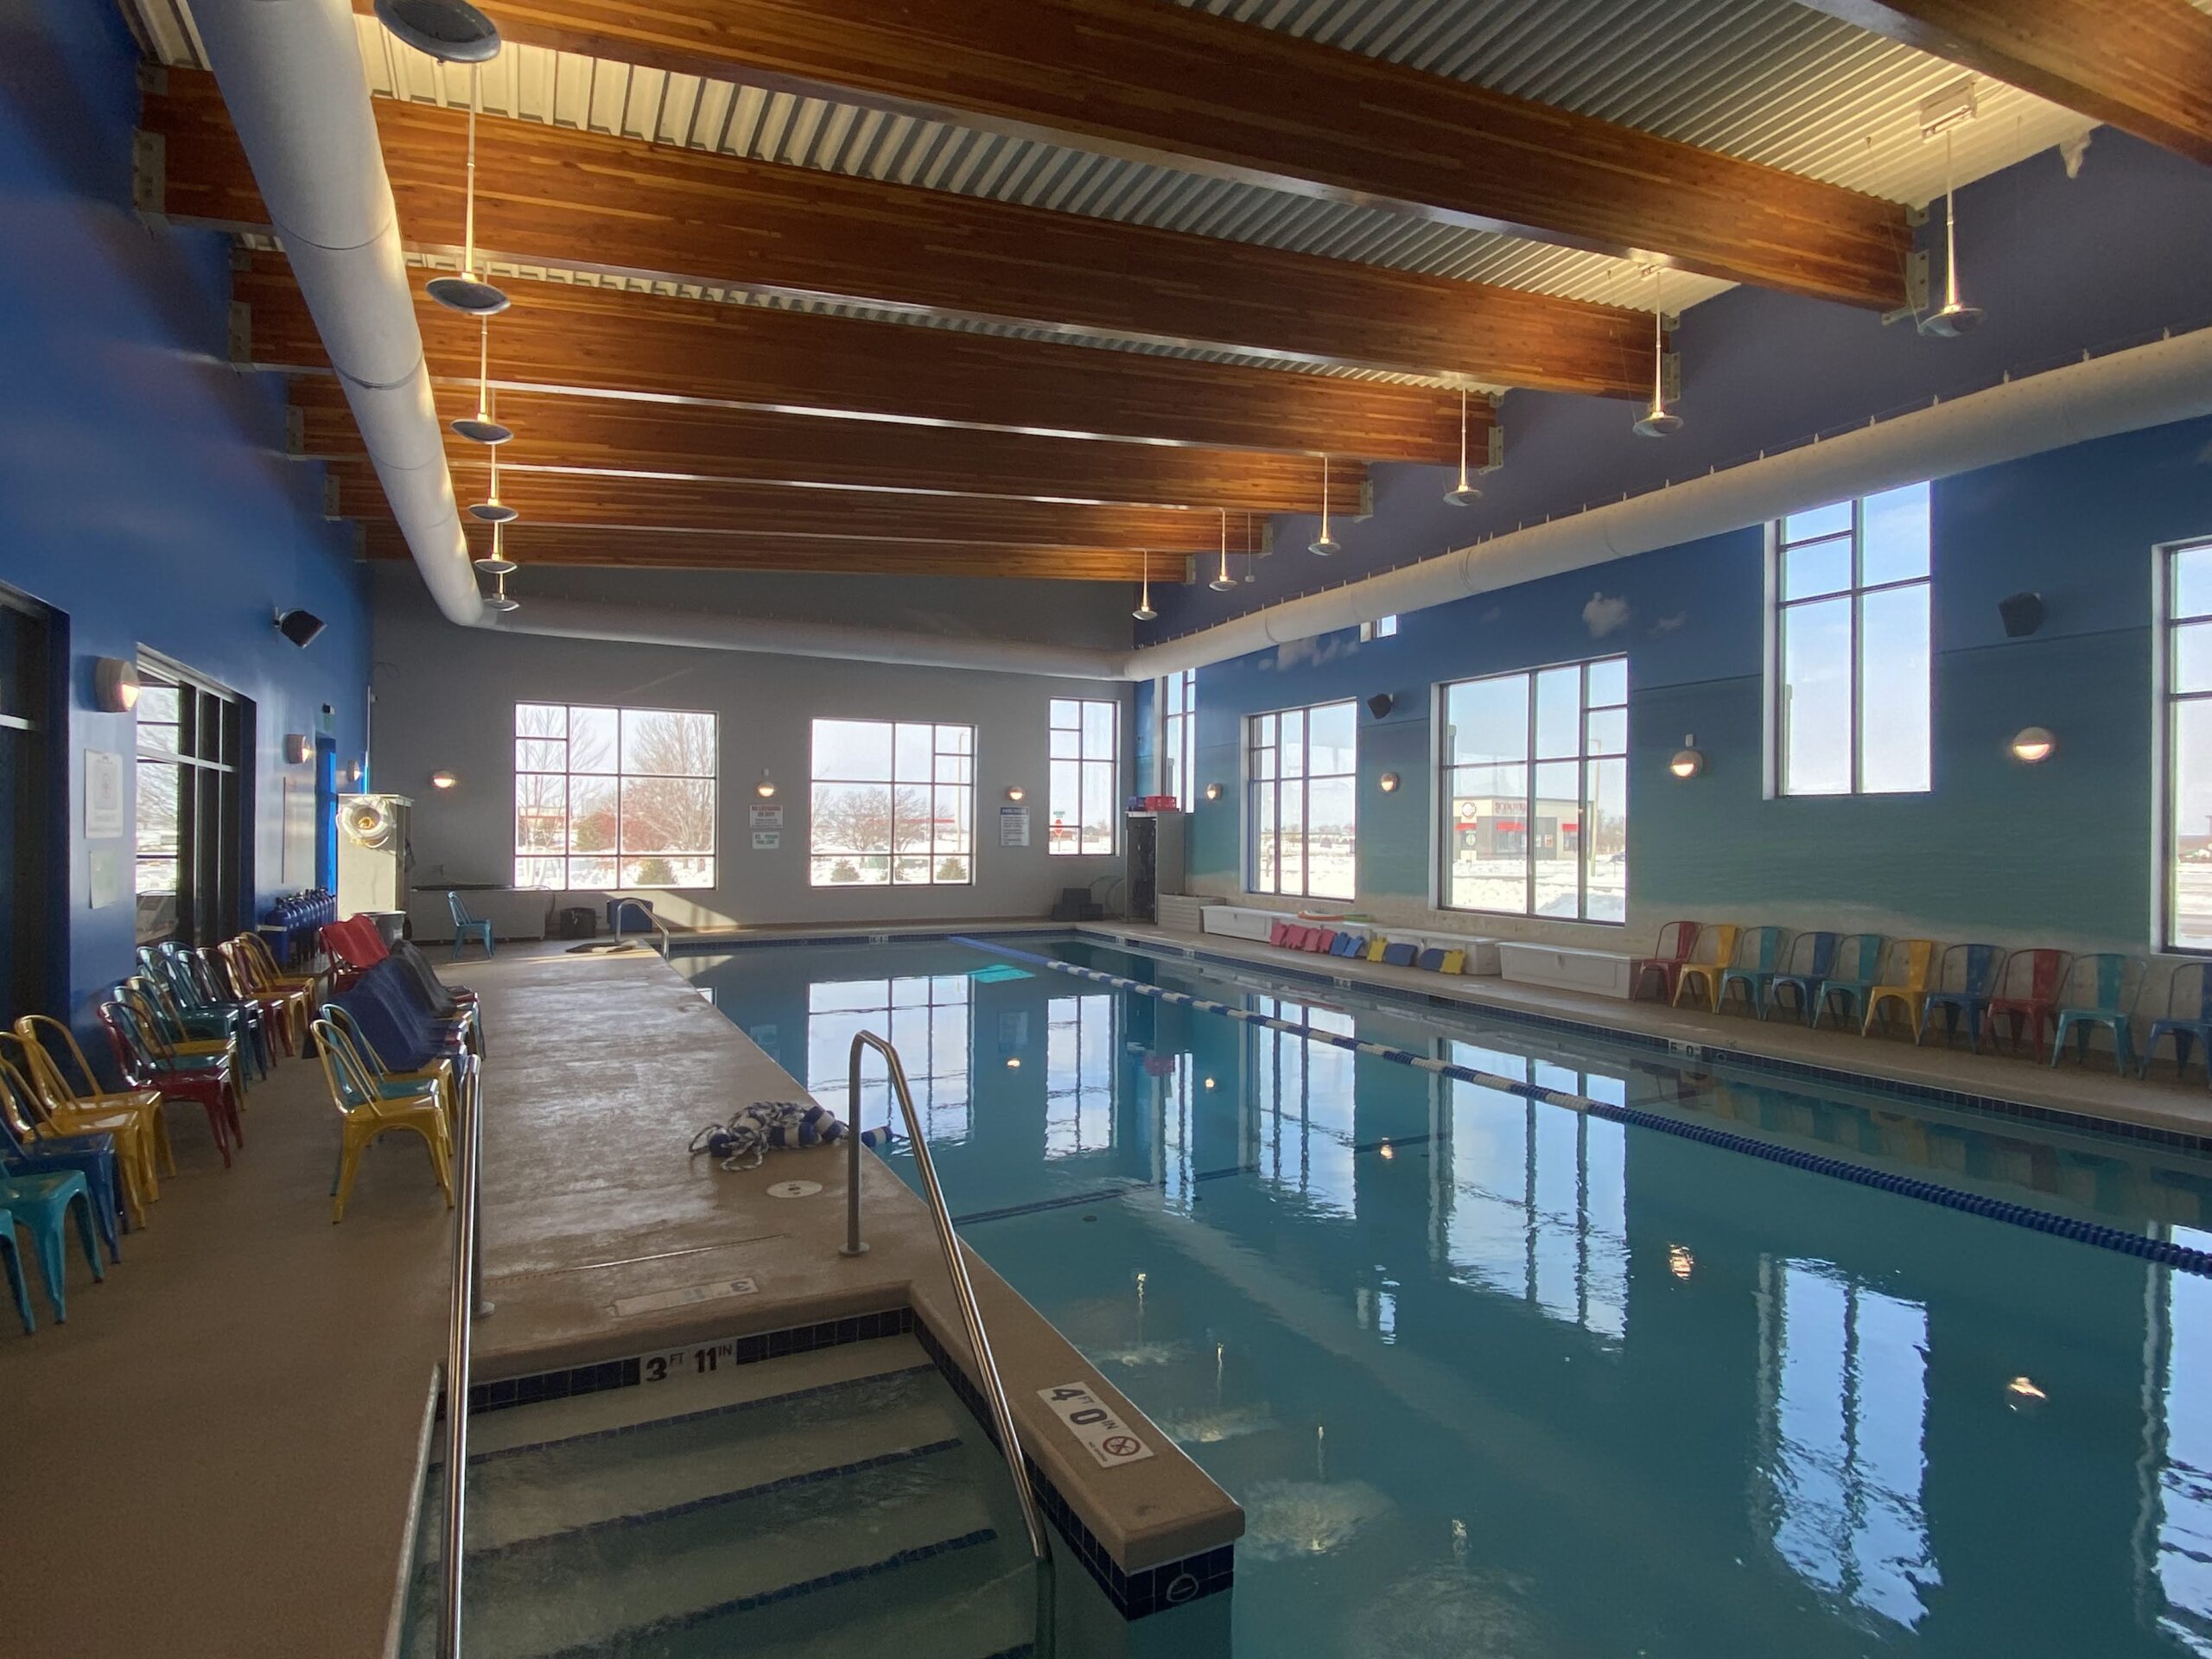 The inside of Diventures' 8,000-square-foot facility in North Liberty, which features a heatead pool.